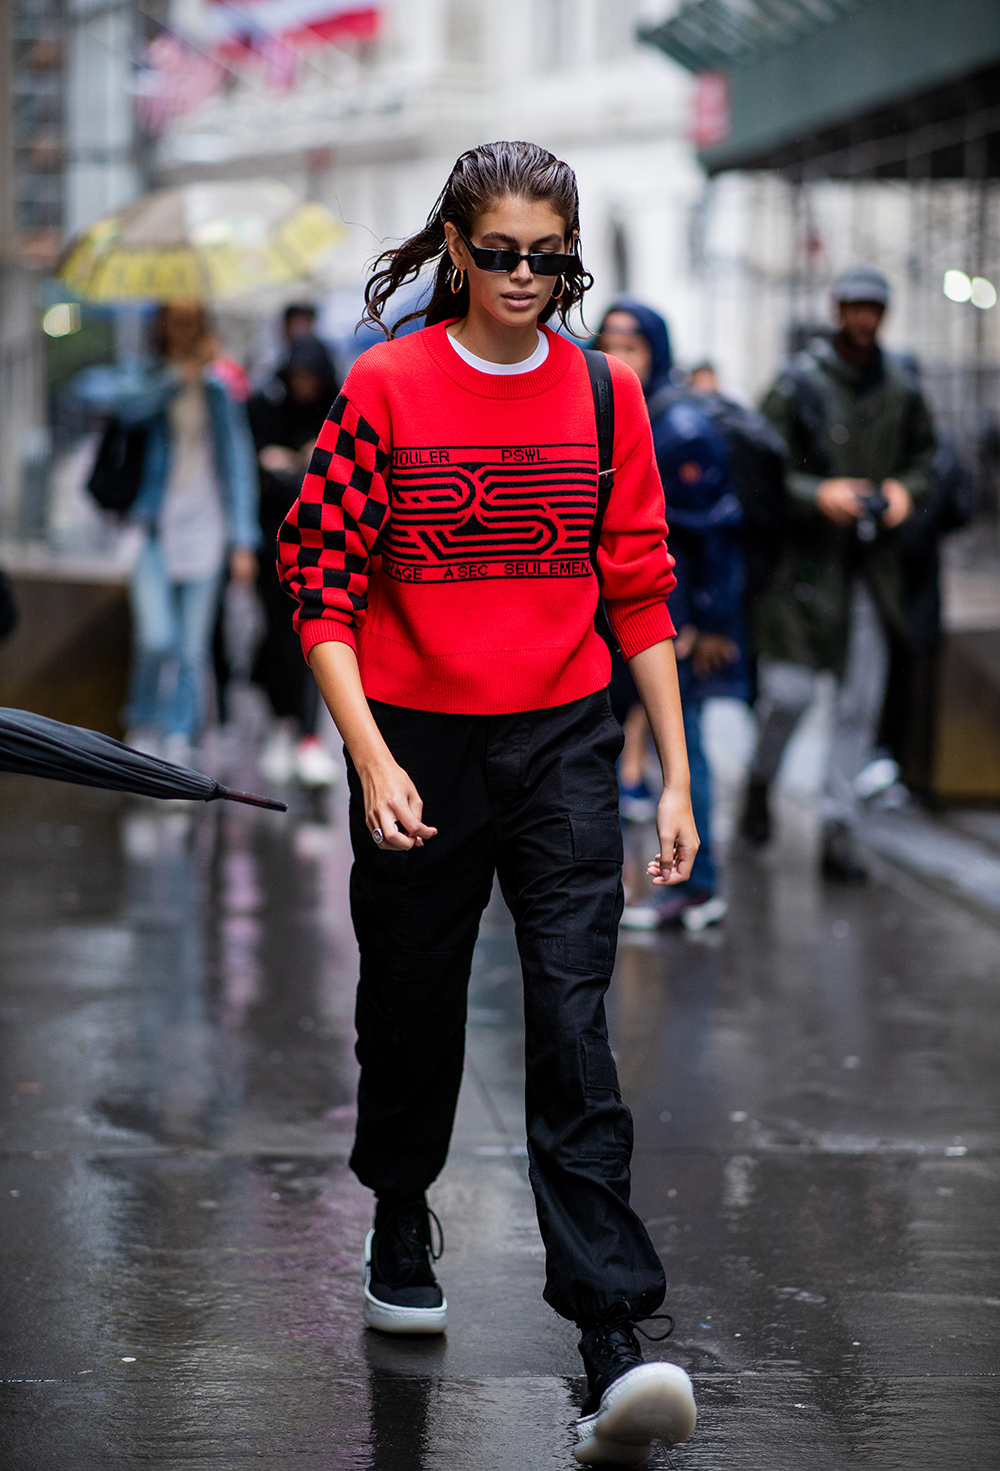 NEW YORK, NY - SEPTEMBER 10: Model Kaia Gerber wearing red sweater, black pants is seen outside Proenza Schouler during New York Fashion Week Spring/Summer 2019 on September 10, 2018 in New York City. (Photo by Christian Vierig/Getty Images)